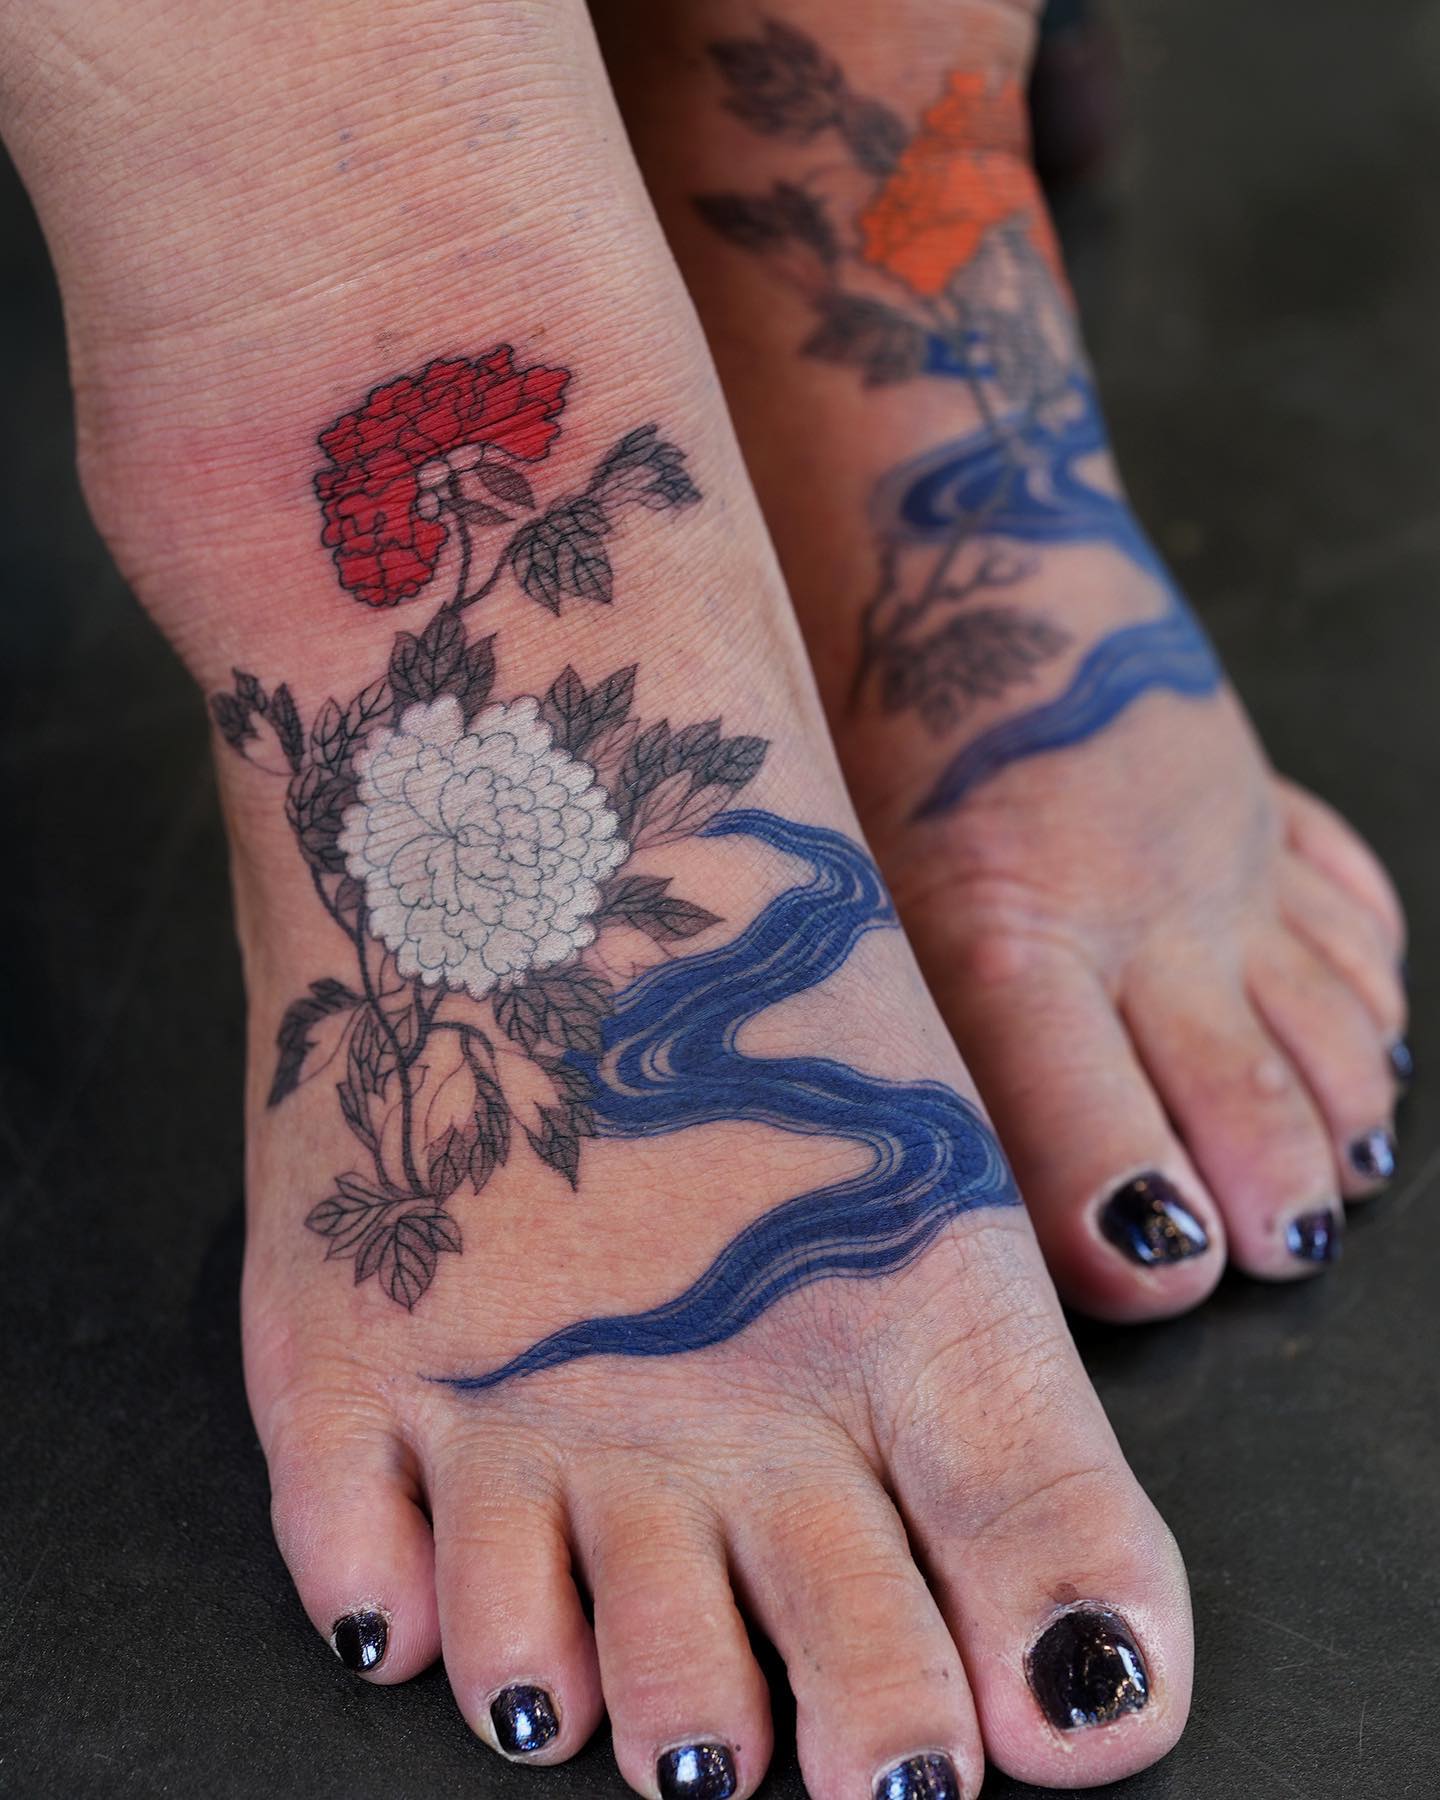 Elegant floral foot tattoos with vibrant colors